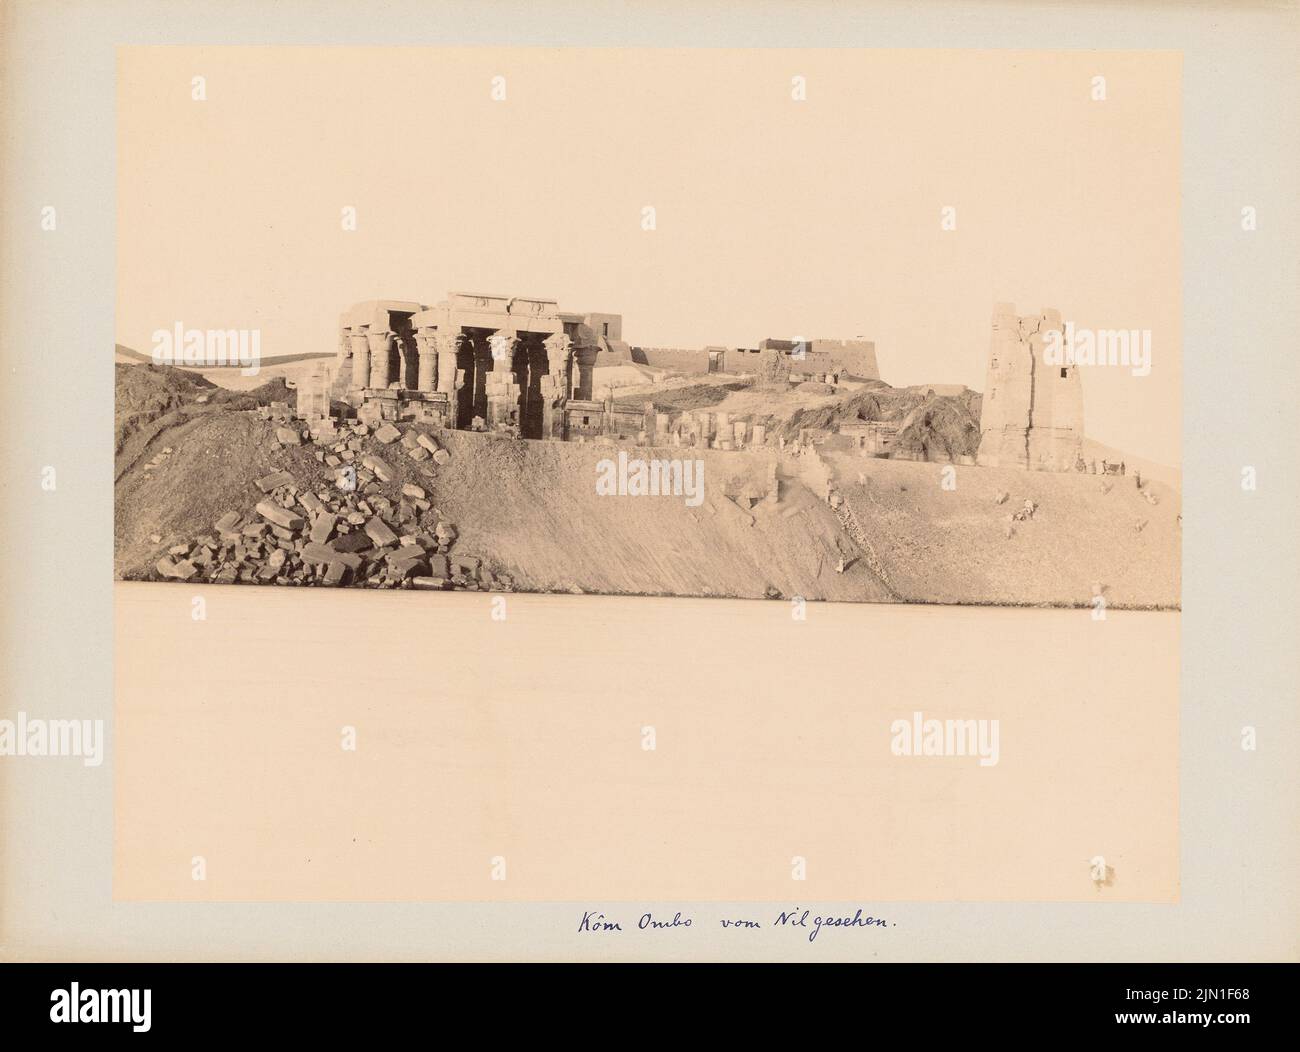 Unknown photographer, Temple of Kom Ombo (without Dat.): View. Photo on cardboard, 23.6 x 31.9 cm (including scan edges) unbek. Fotograf : Tempel von Kom Ombo Stock Photo